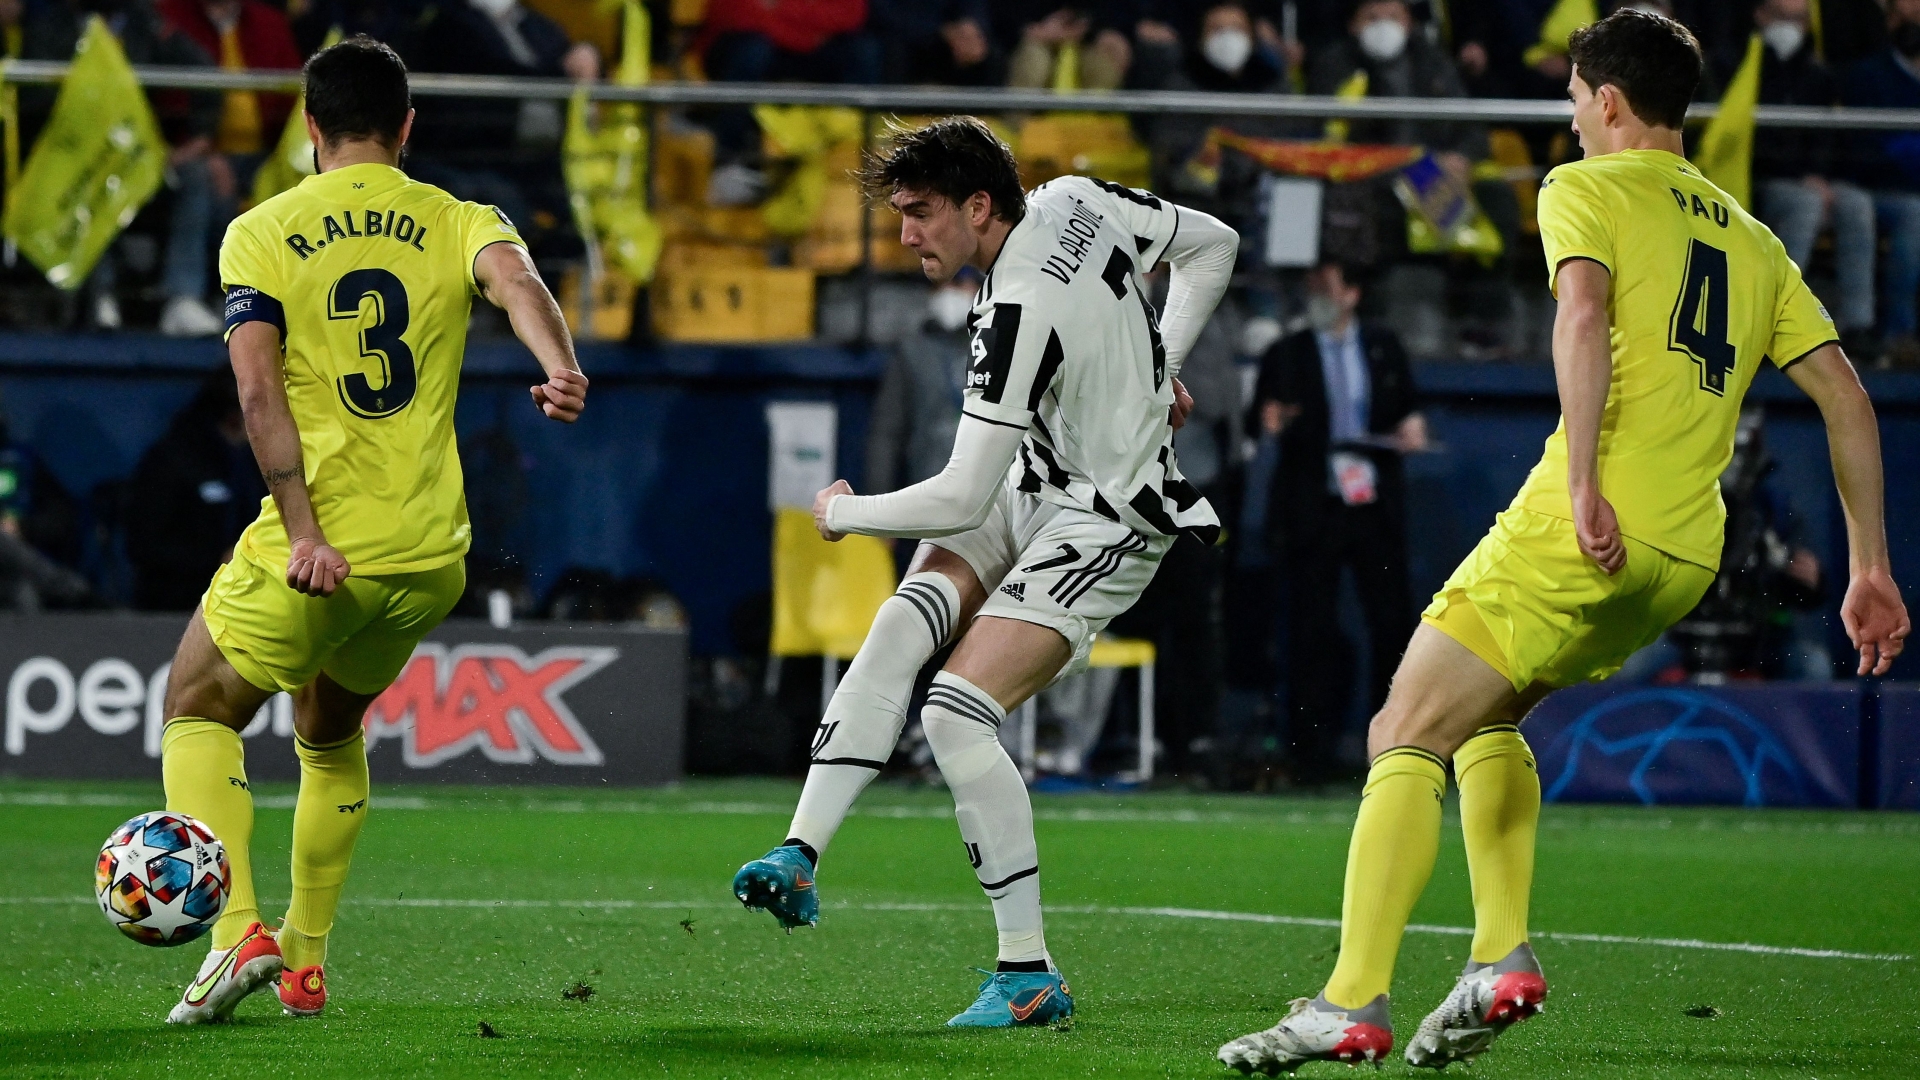 Vlahovic sets modern Juventus record with Champions League debut goal after  32 seconds | Goal.com